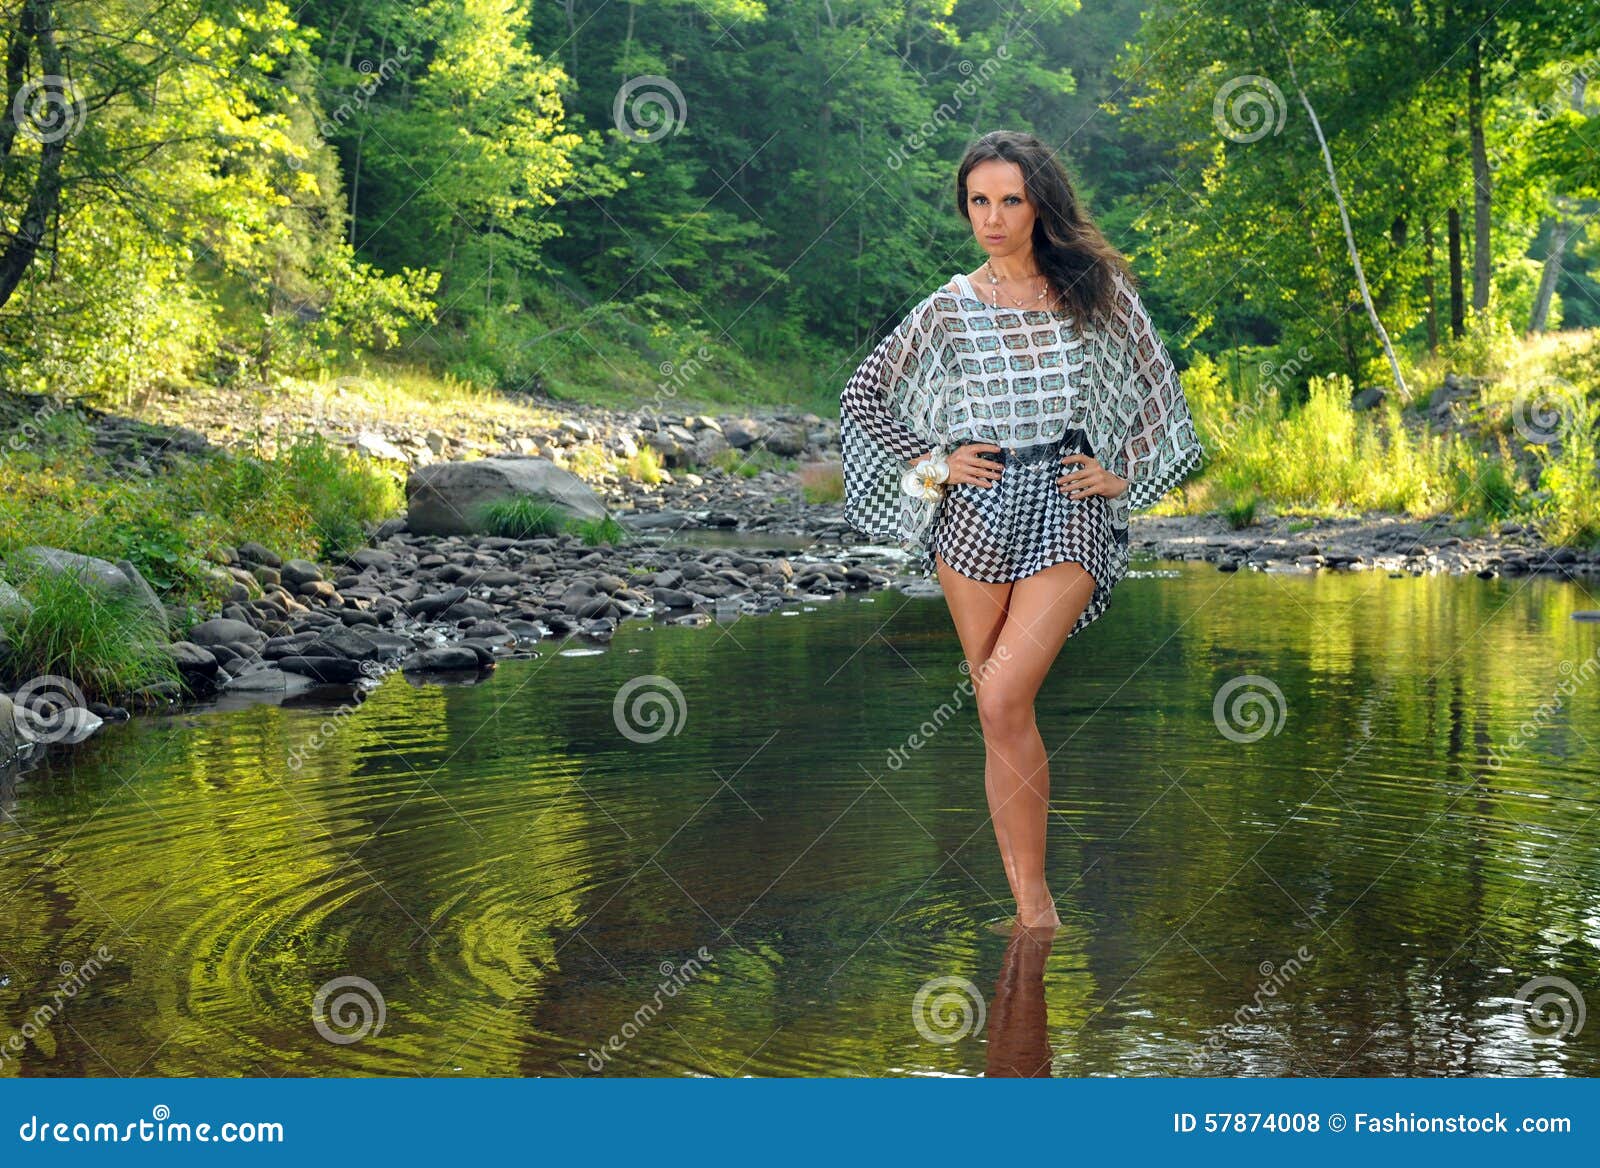 Fashion Model Posing Pretty at the Nature Stock Photo - Image of posing, 57874008